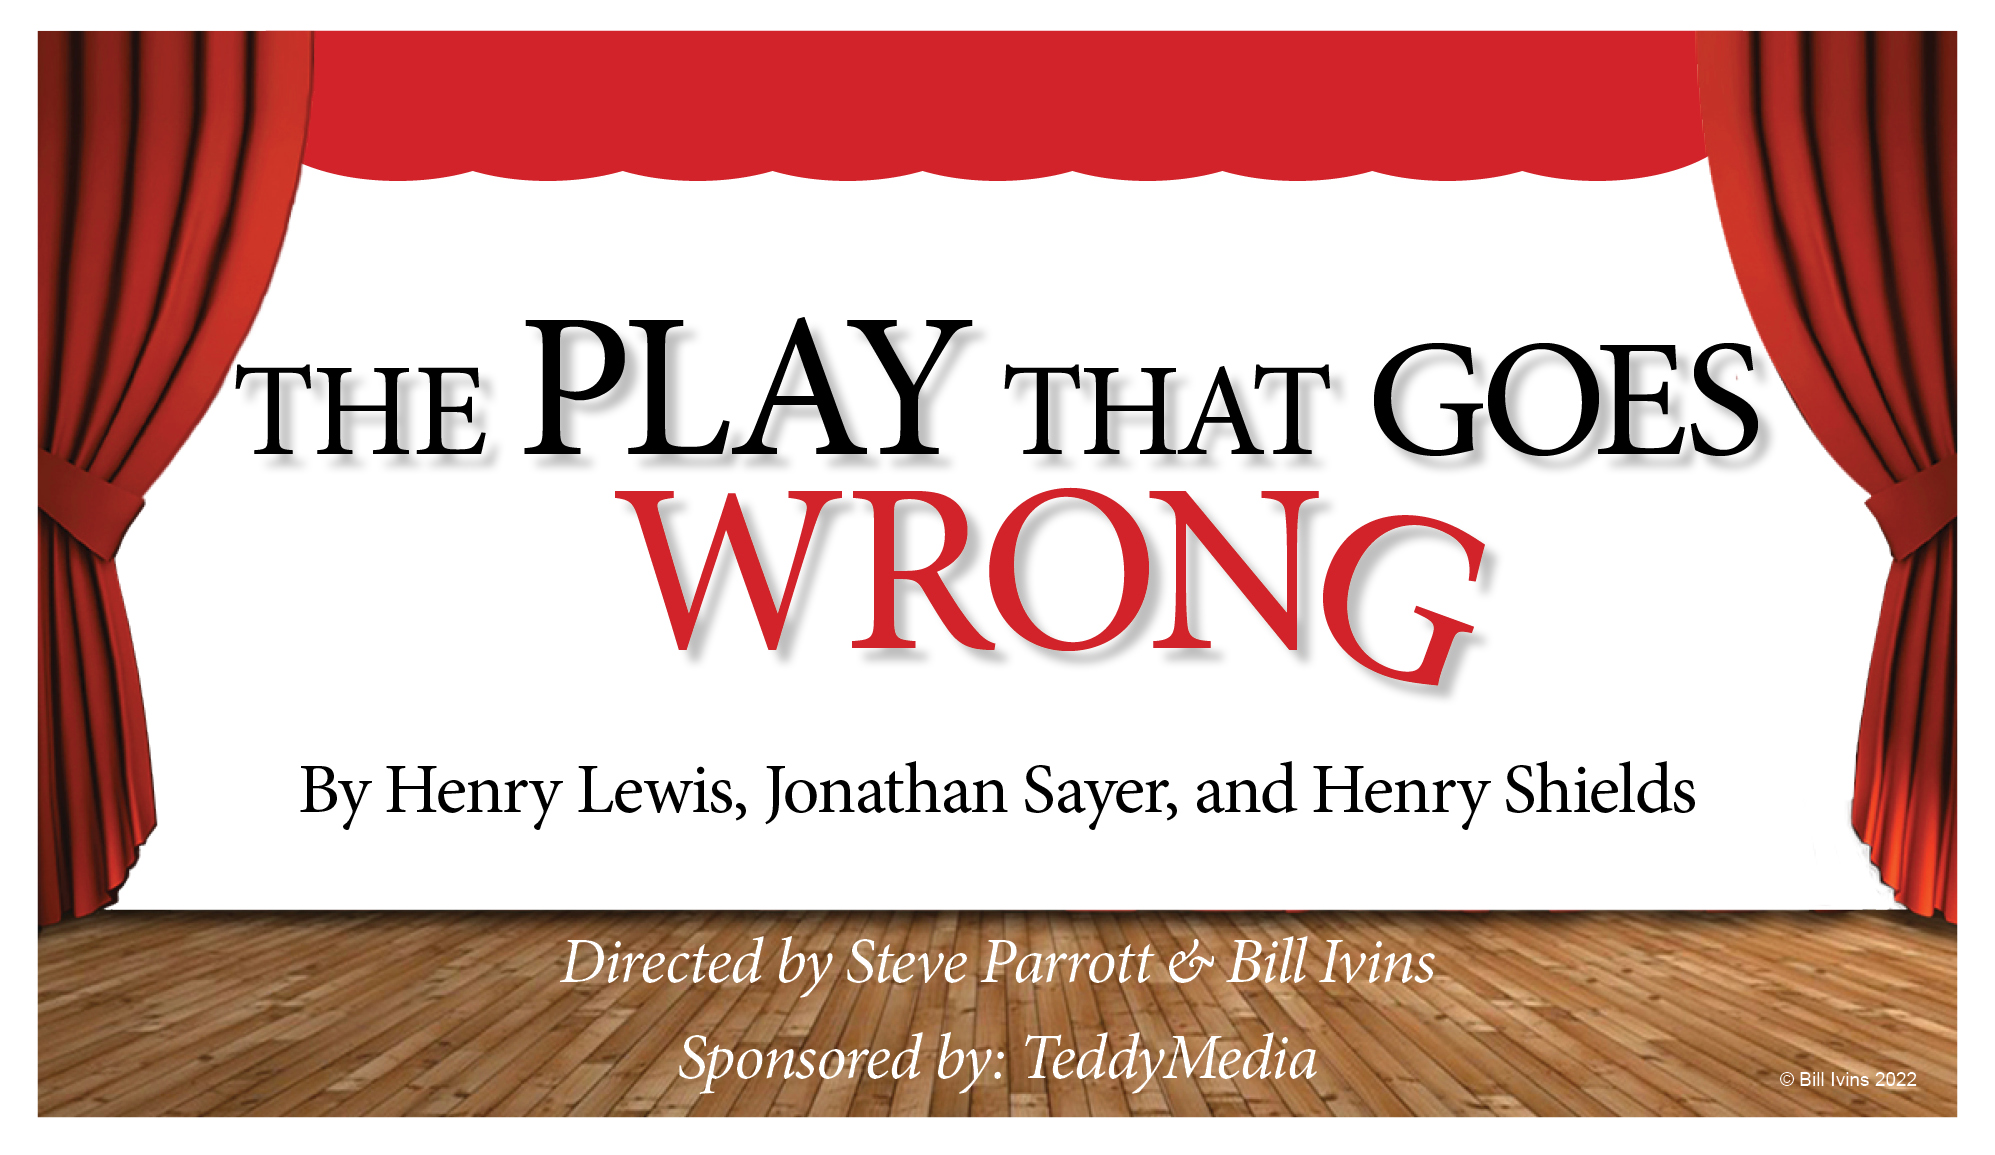 The Play That Goes Wrong set inside a red theater curtain